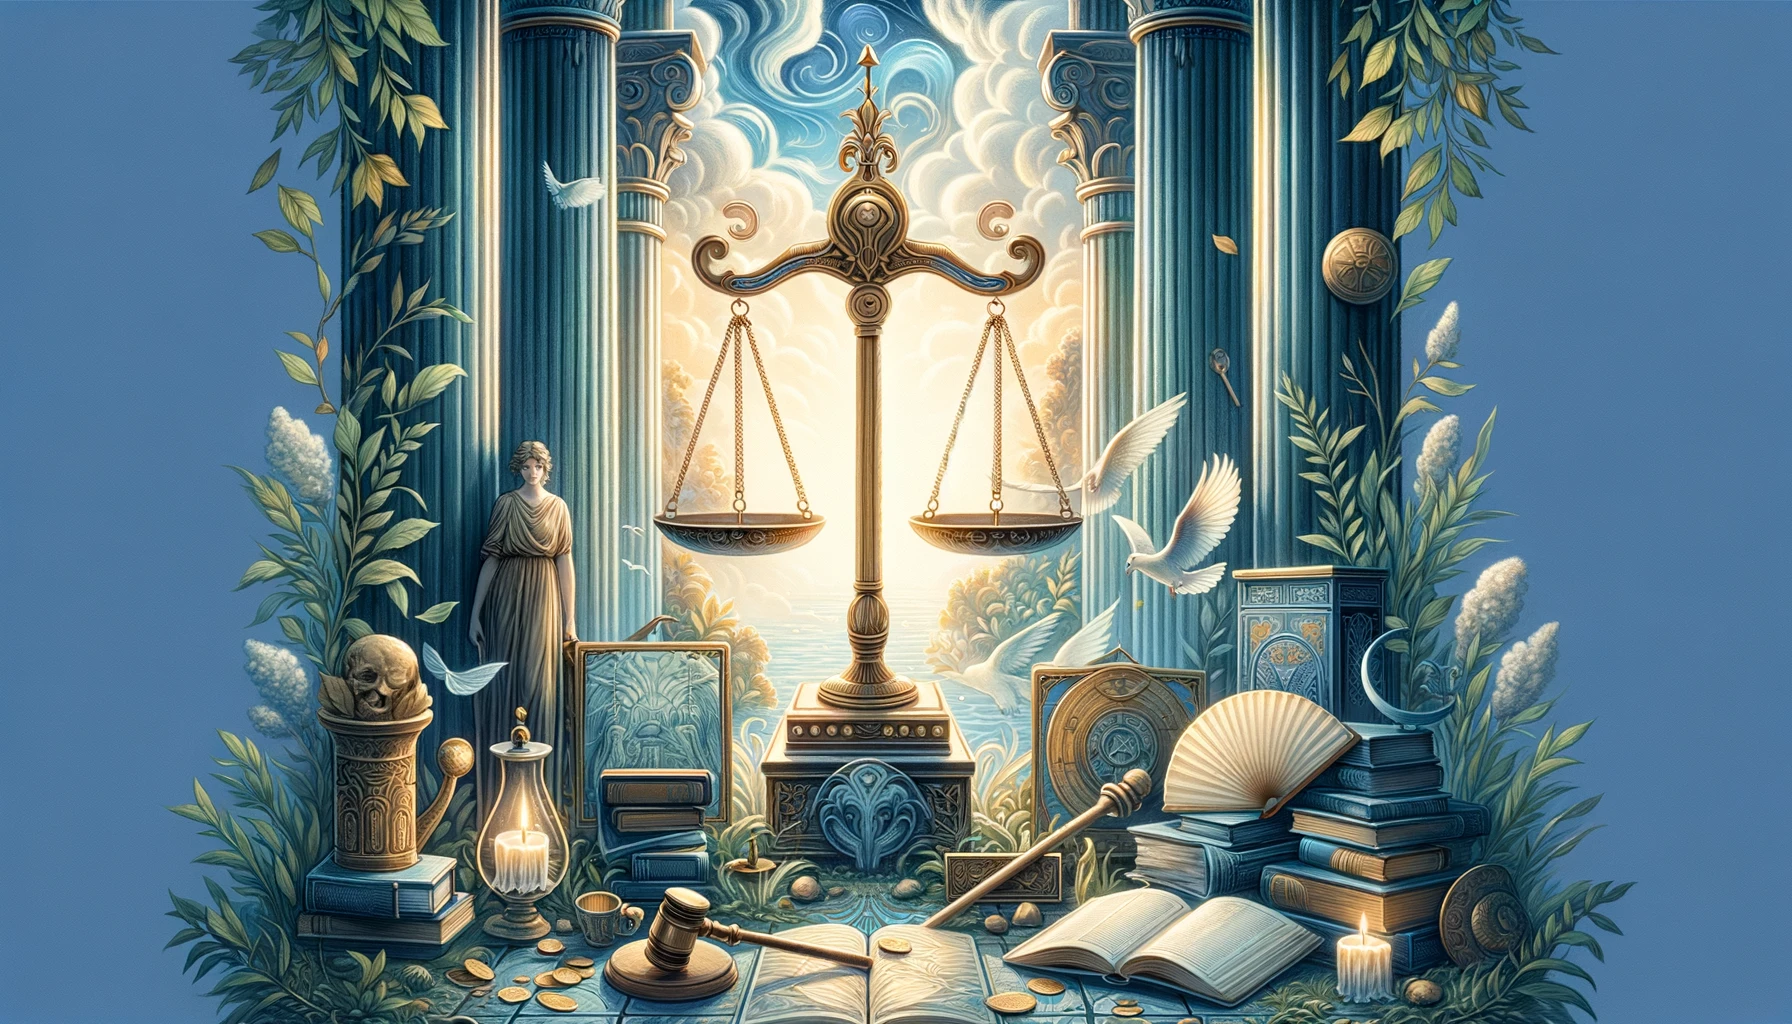 "In this visualization, the pursuit of fairness, balance, and truth is depicted in a tranquil environment adorned with symbols of justice, suggesting a serene and contemplative nature. The peaceful background and elements of nature reflect the emotional state of seeking justice and balance, with a color palette of soft blues, greens, and golds emphasizing clarity, peace, and stability. Through its imagery, viewers are invited to contemplate the quest for truth and the importance of maintaining equilibrium in decision-making processes."